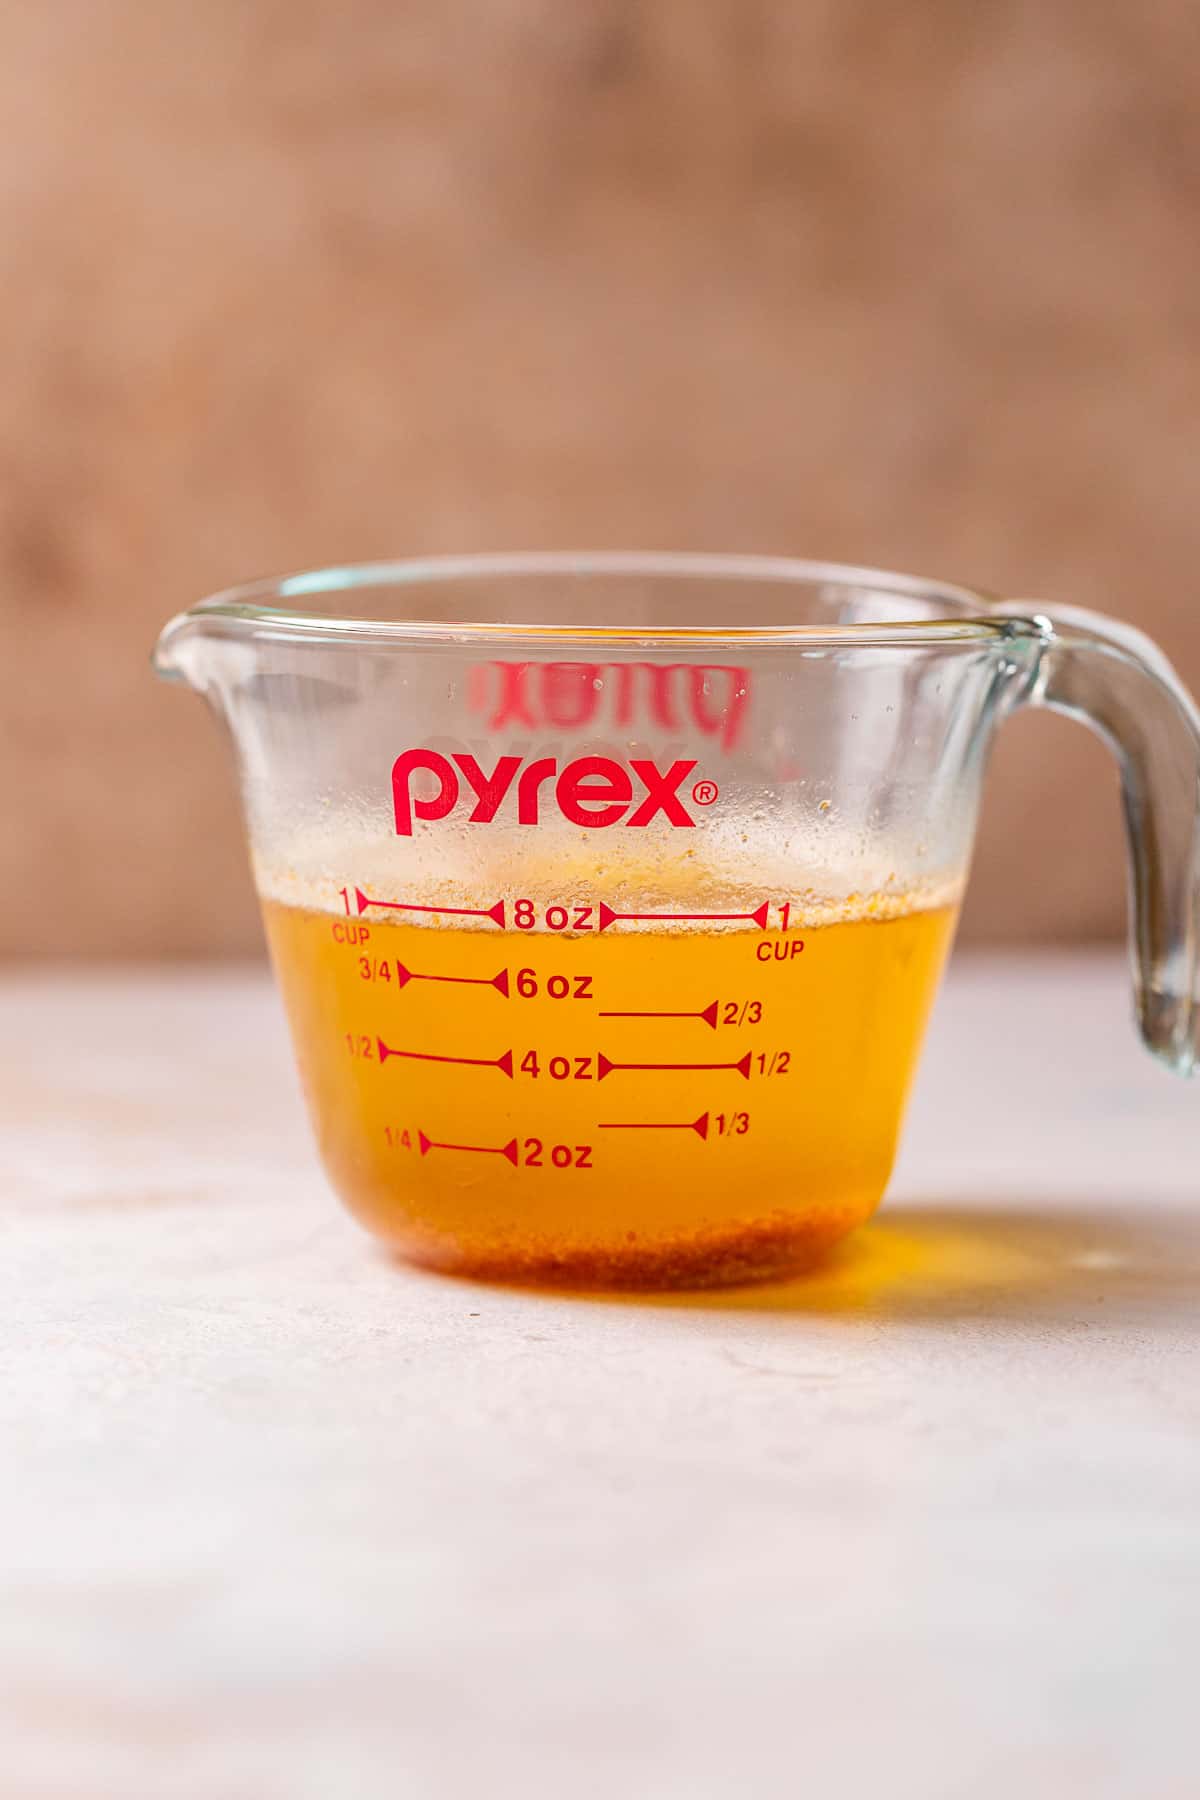 A glass pyrex measuring cup with browned american butter to show the moisture loss after browning.